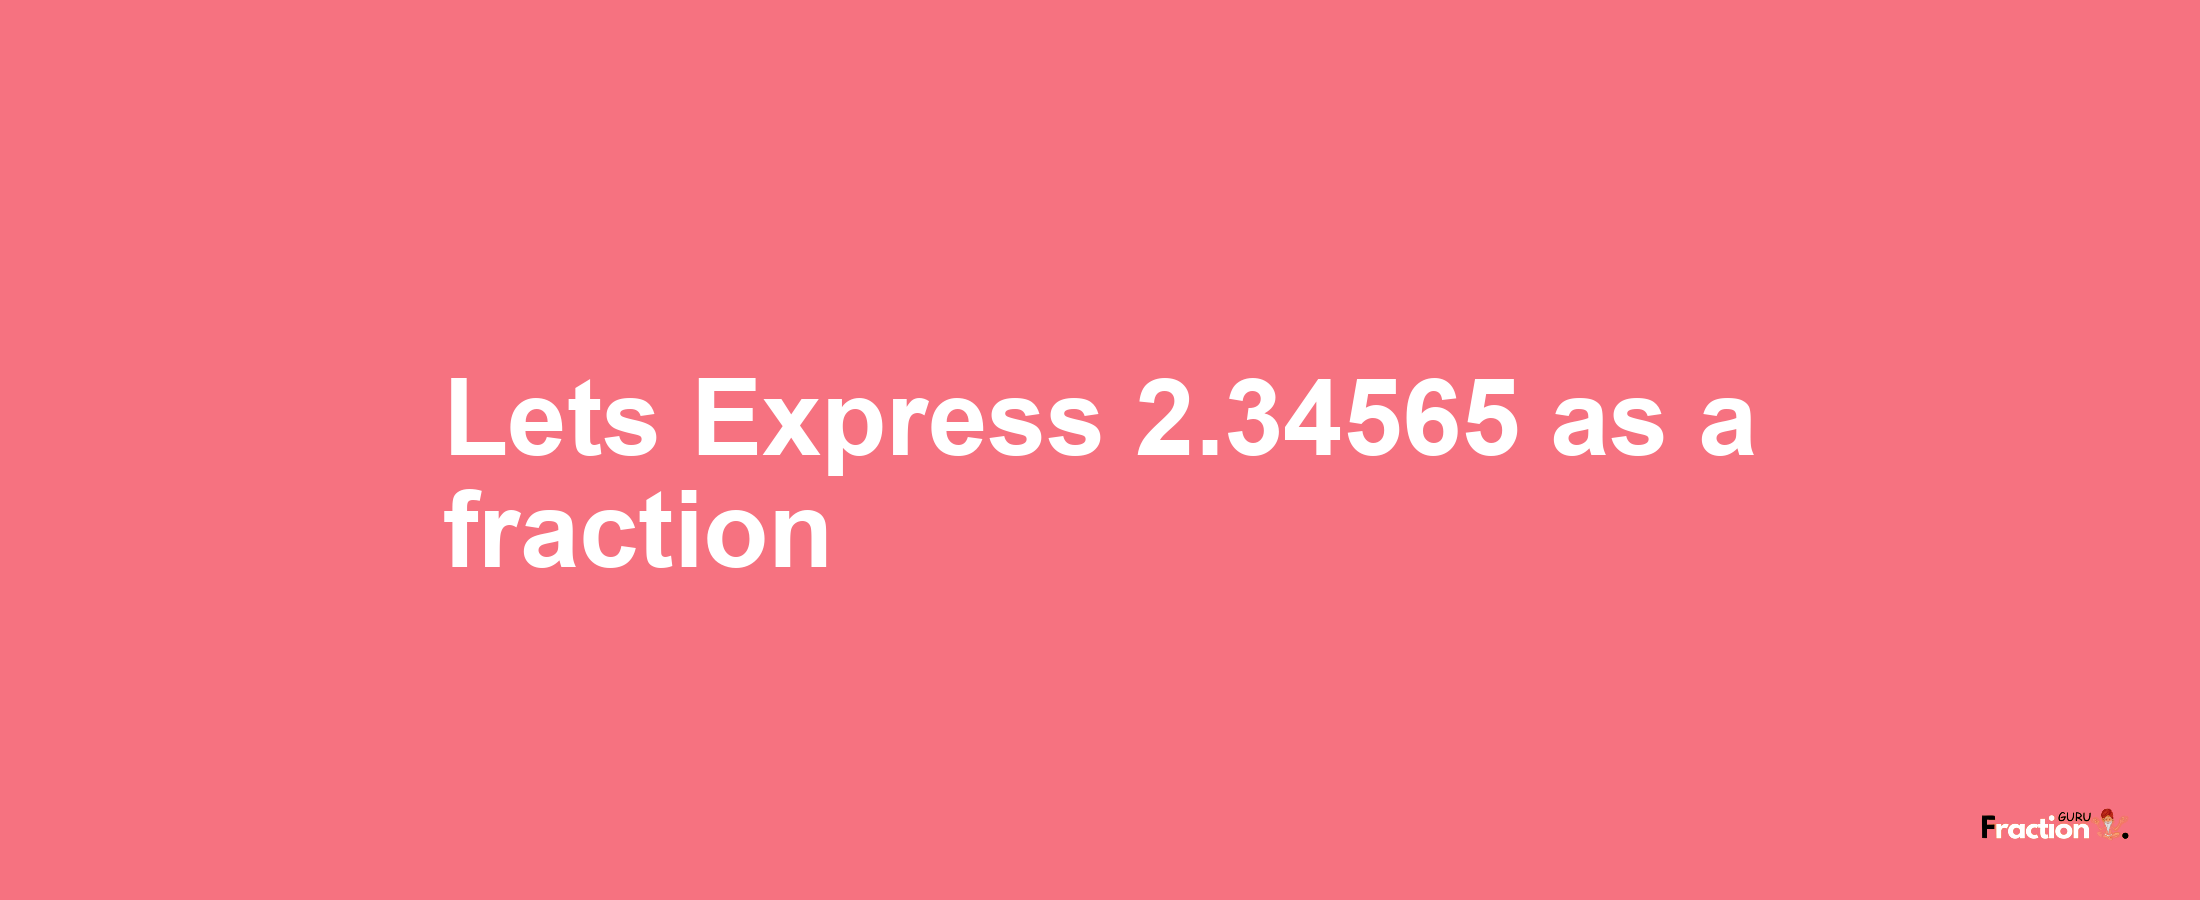 Lets Express 2.34565 as afraction